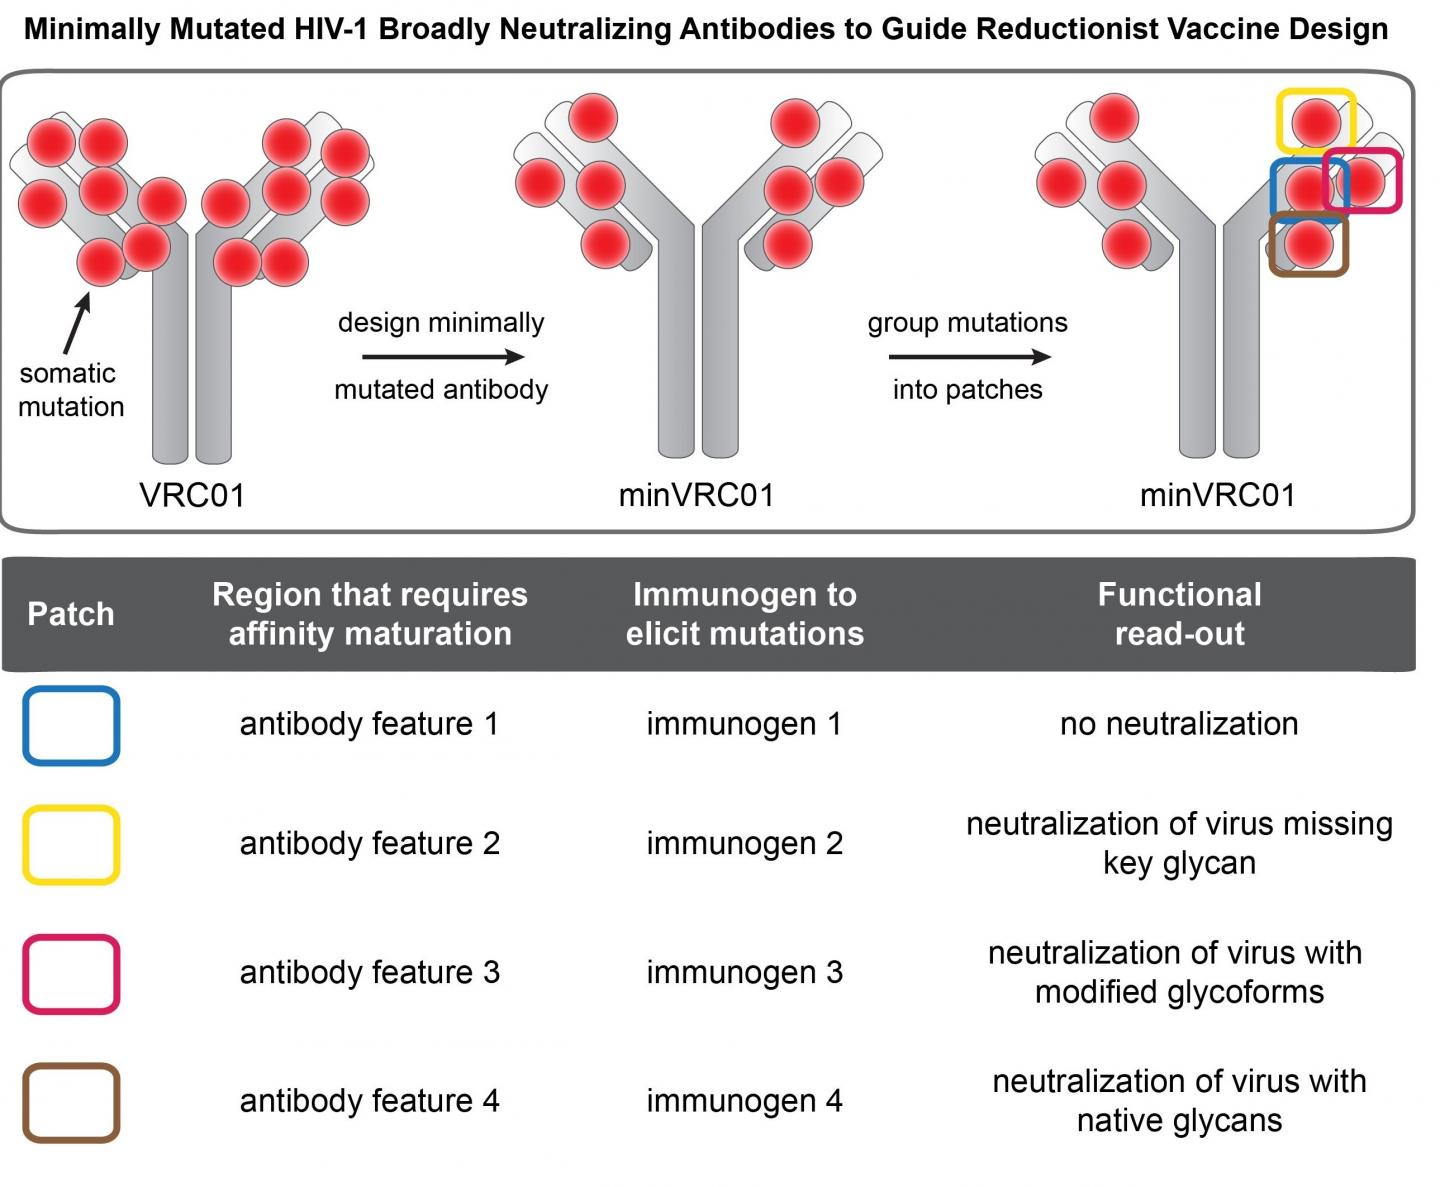 A Reductionist Approach to HIV Vaccine Design